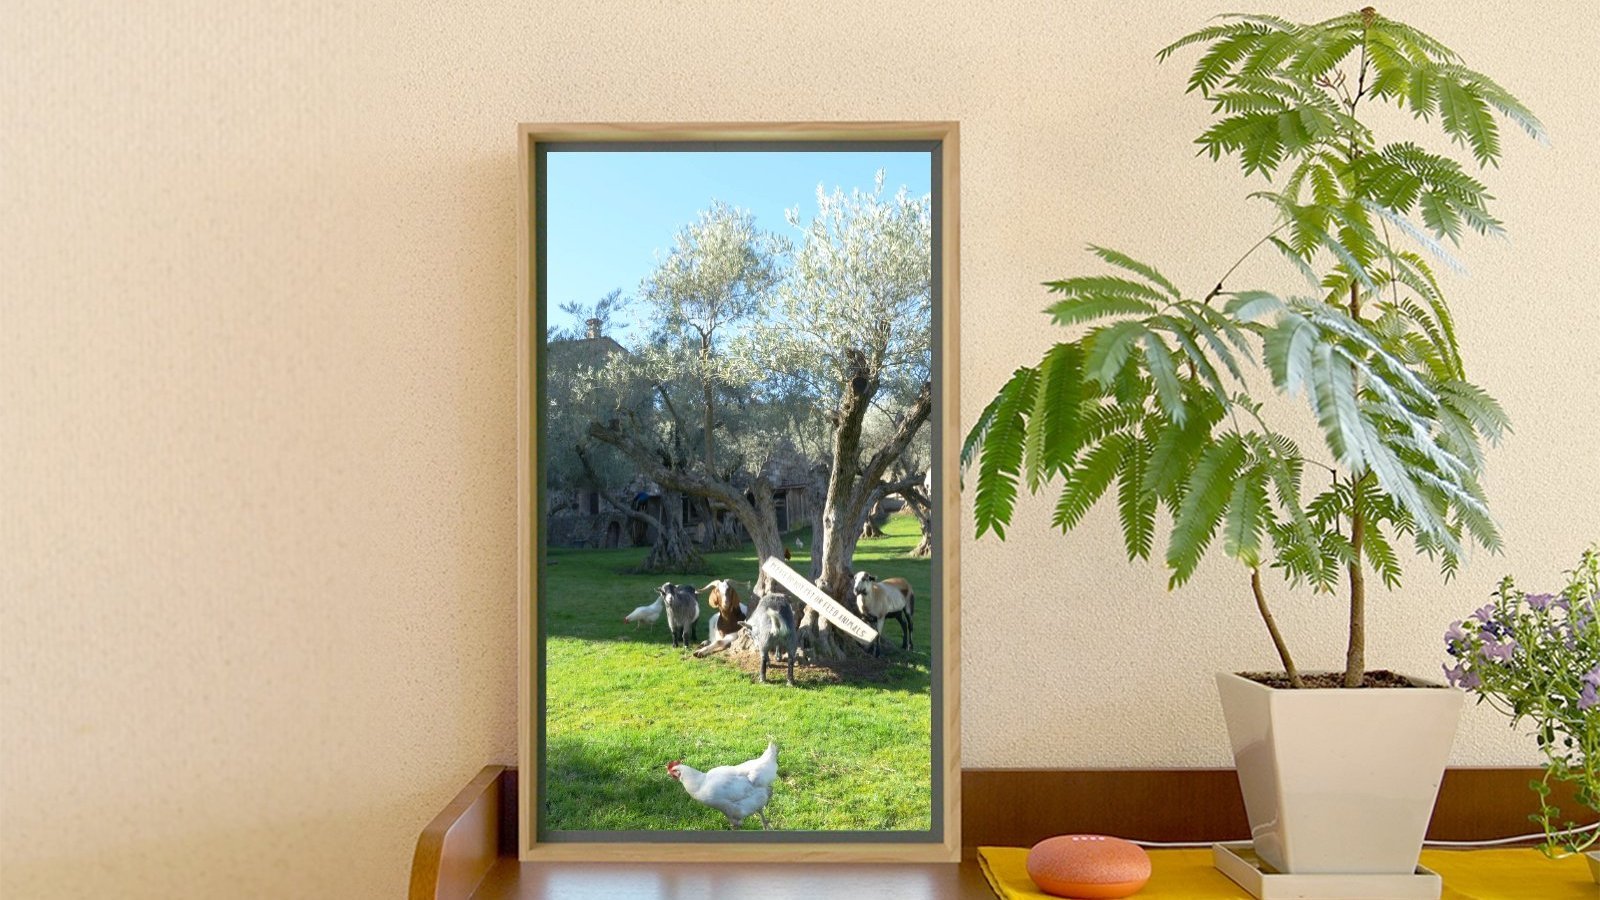 Atmoph Window 2 Smart Wall Scenery Display lets you choose from 1,000 beautiful visuals